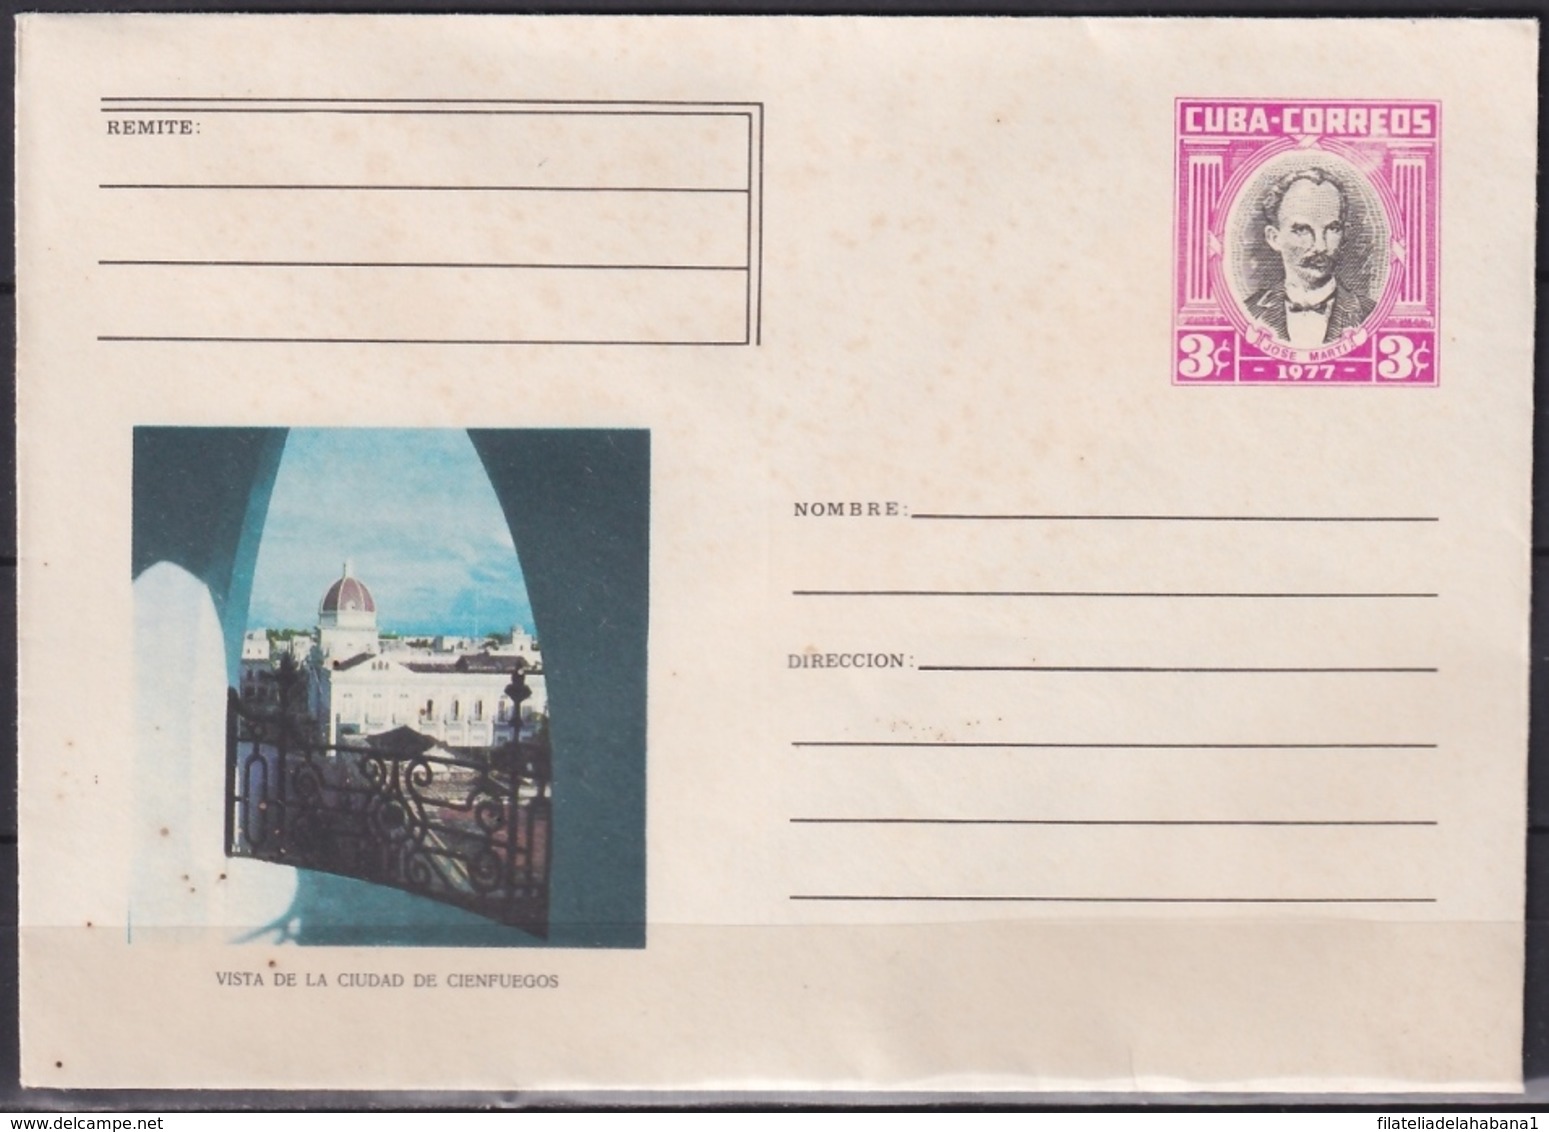 1977-EP-68 CUBA 1977 COMPLETE SET 5 POSTAL STATIONERY COVER COMPLETE YEAR. - Briefe U. Dokumente